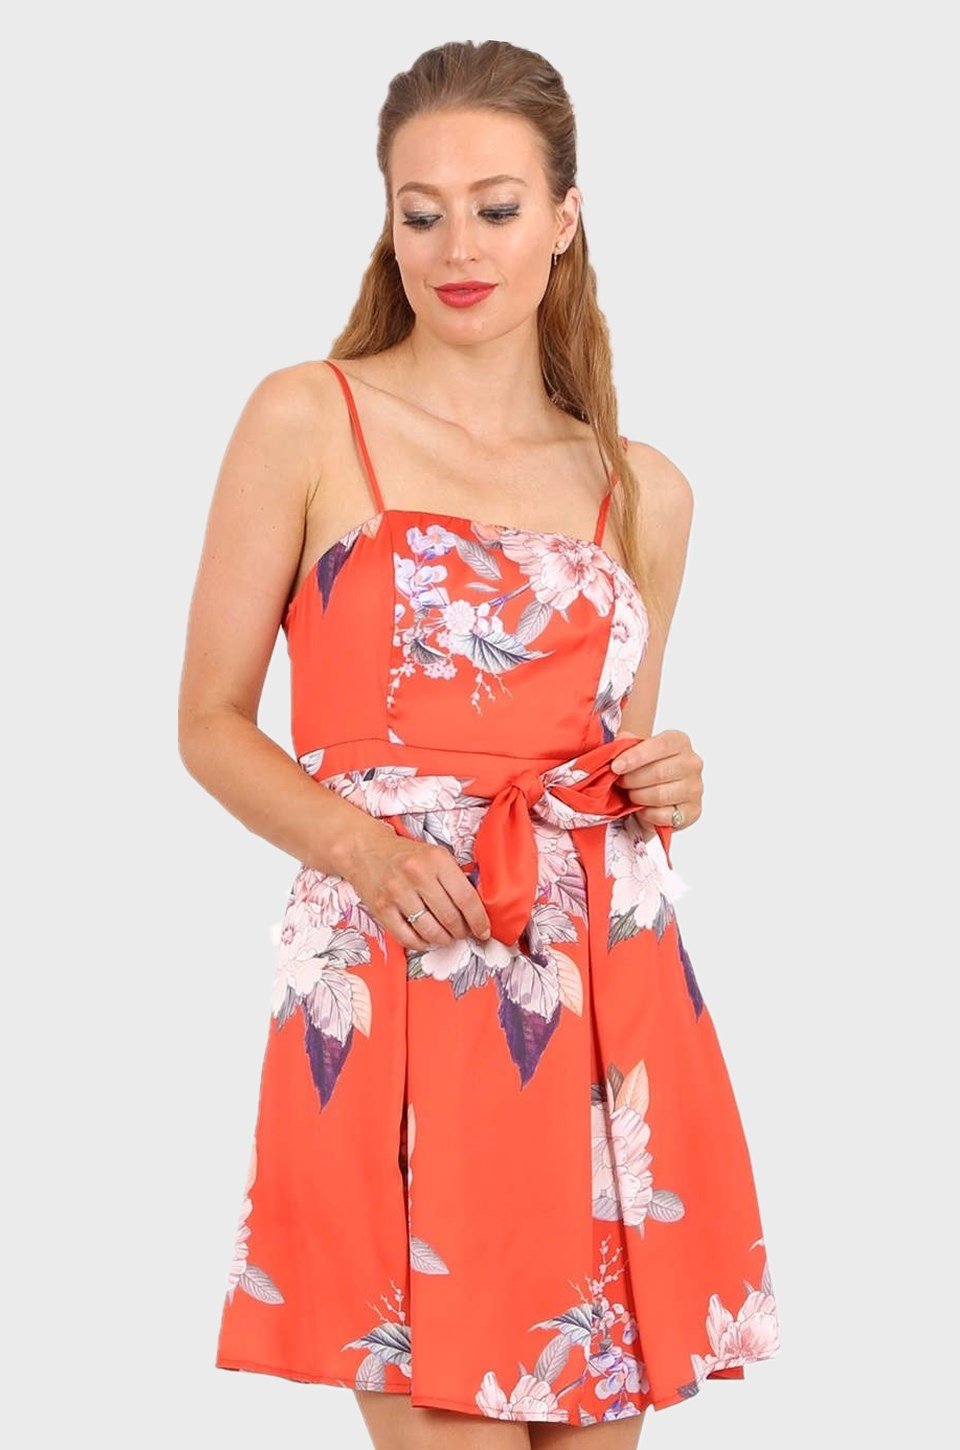 MISS PINKI Isalel cami satin party cocktail Dress in orange floral